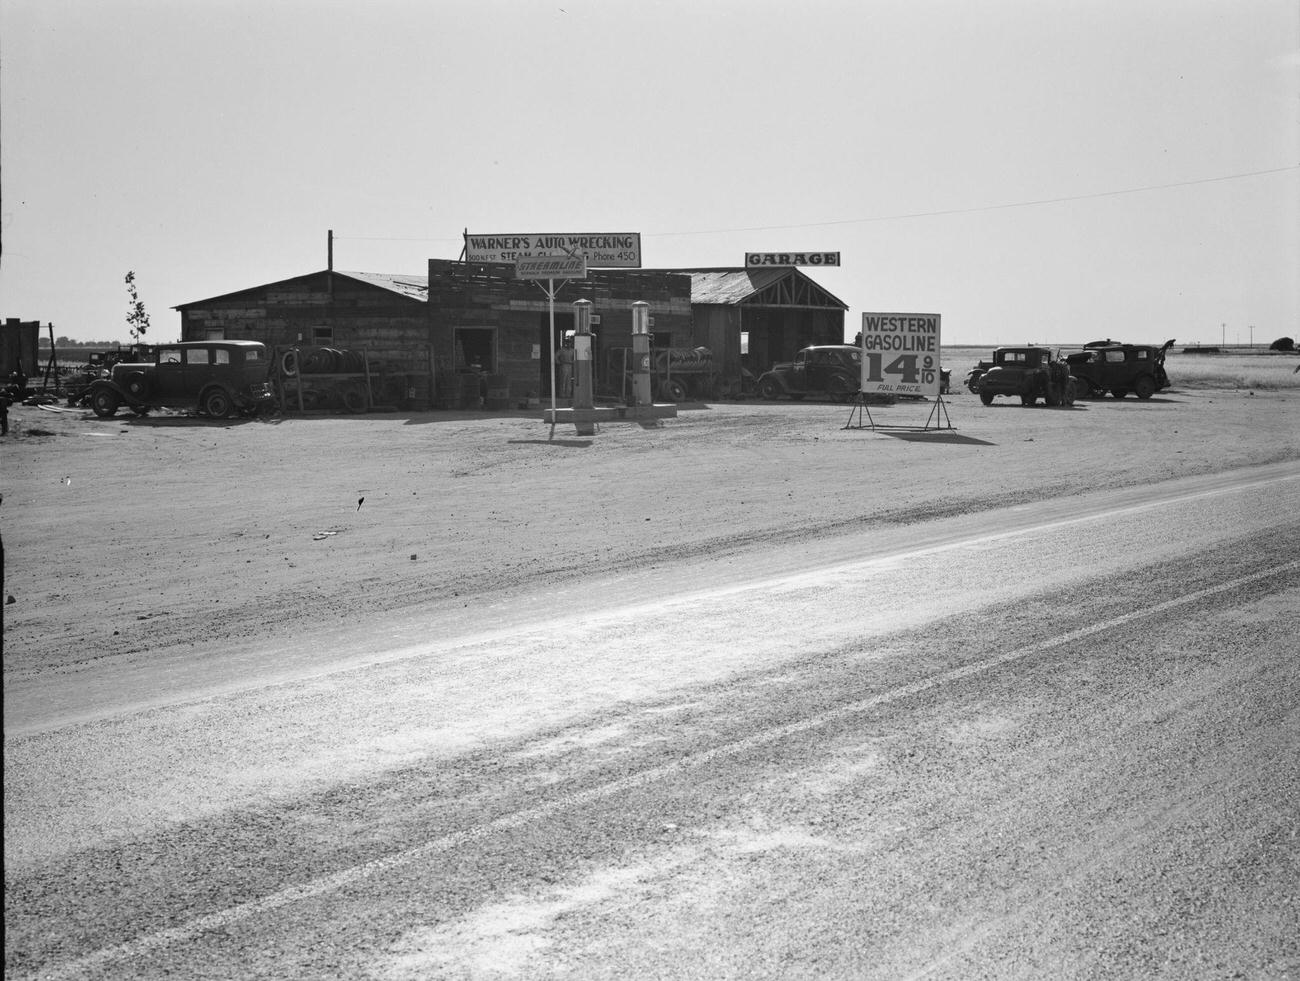 Roadside Gas Station Between Tulare and Fresno, California